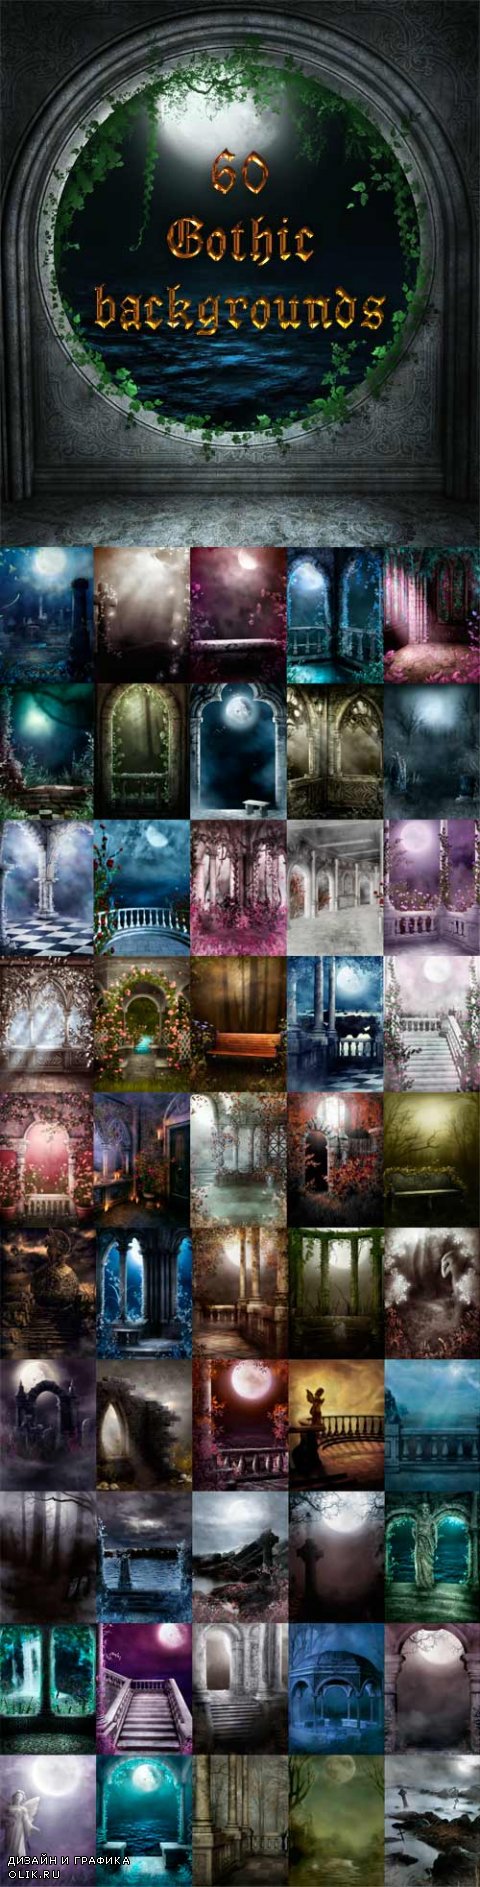 60 Gothic backgrounds